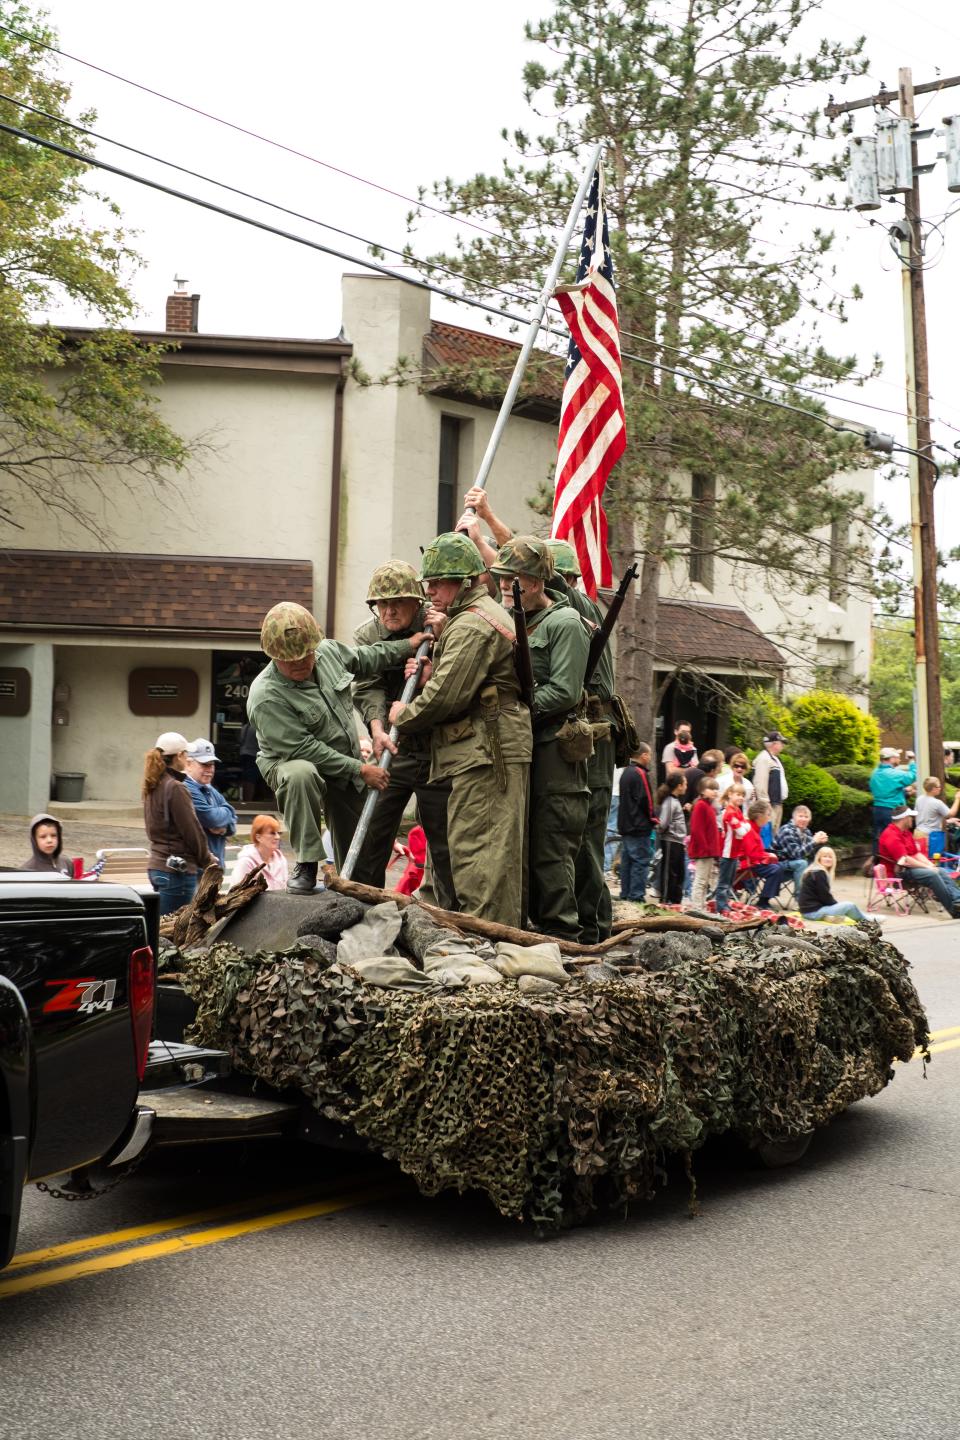 The Cuyahoga Falls Memorial Day Parade will step off at 9 a.m. Monday. Pictured is the Iwo Jima Float from Chesty Puller Detachment No. 269 Marine Corps League, a tradition of the parade.